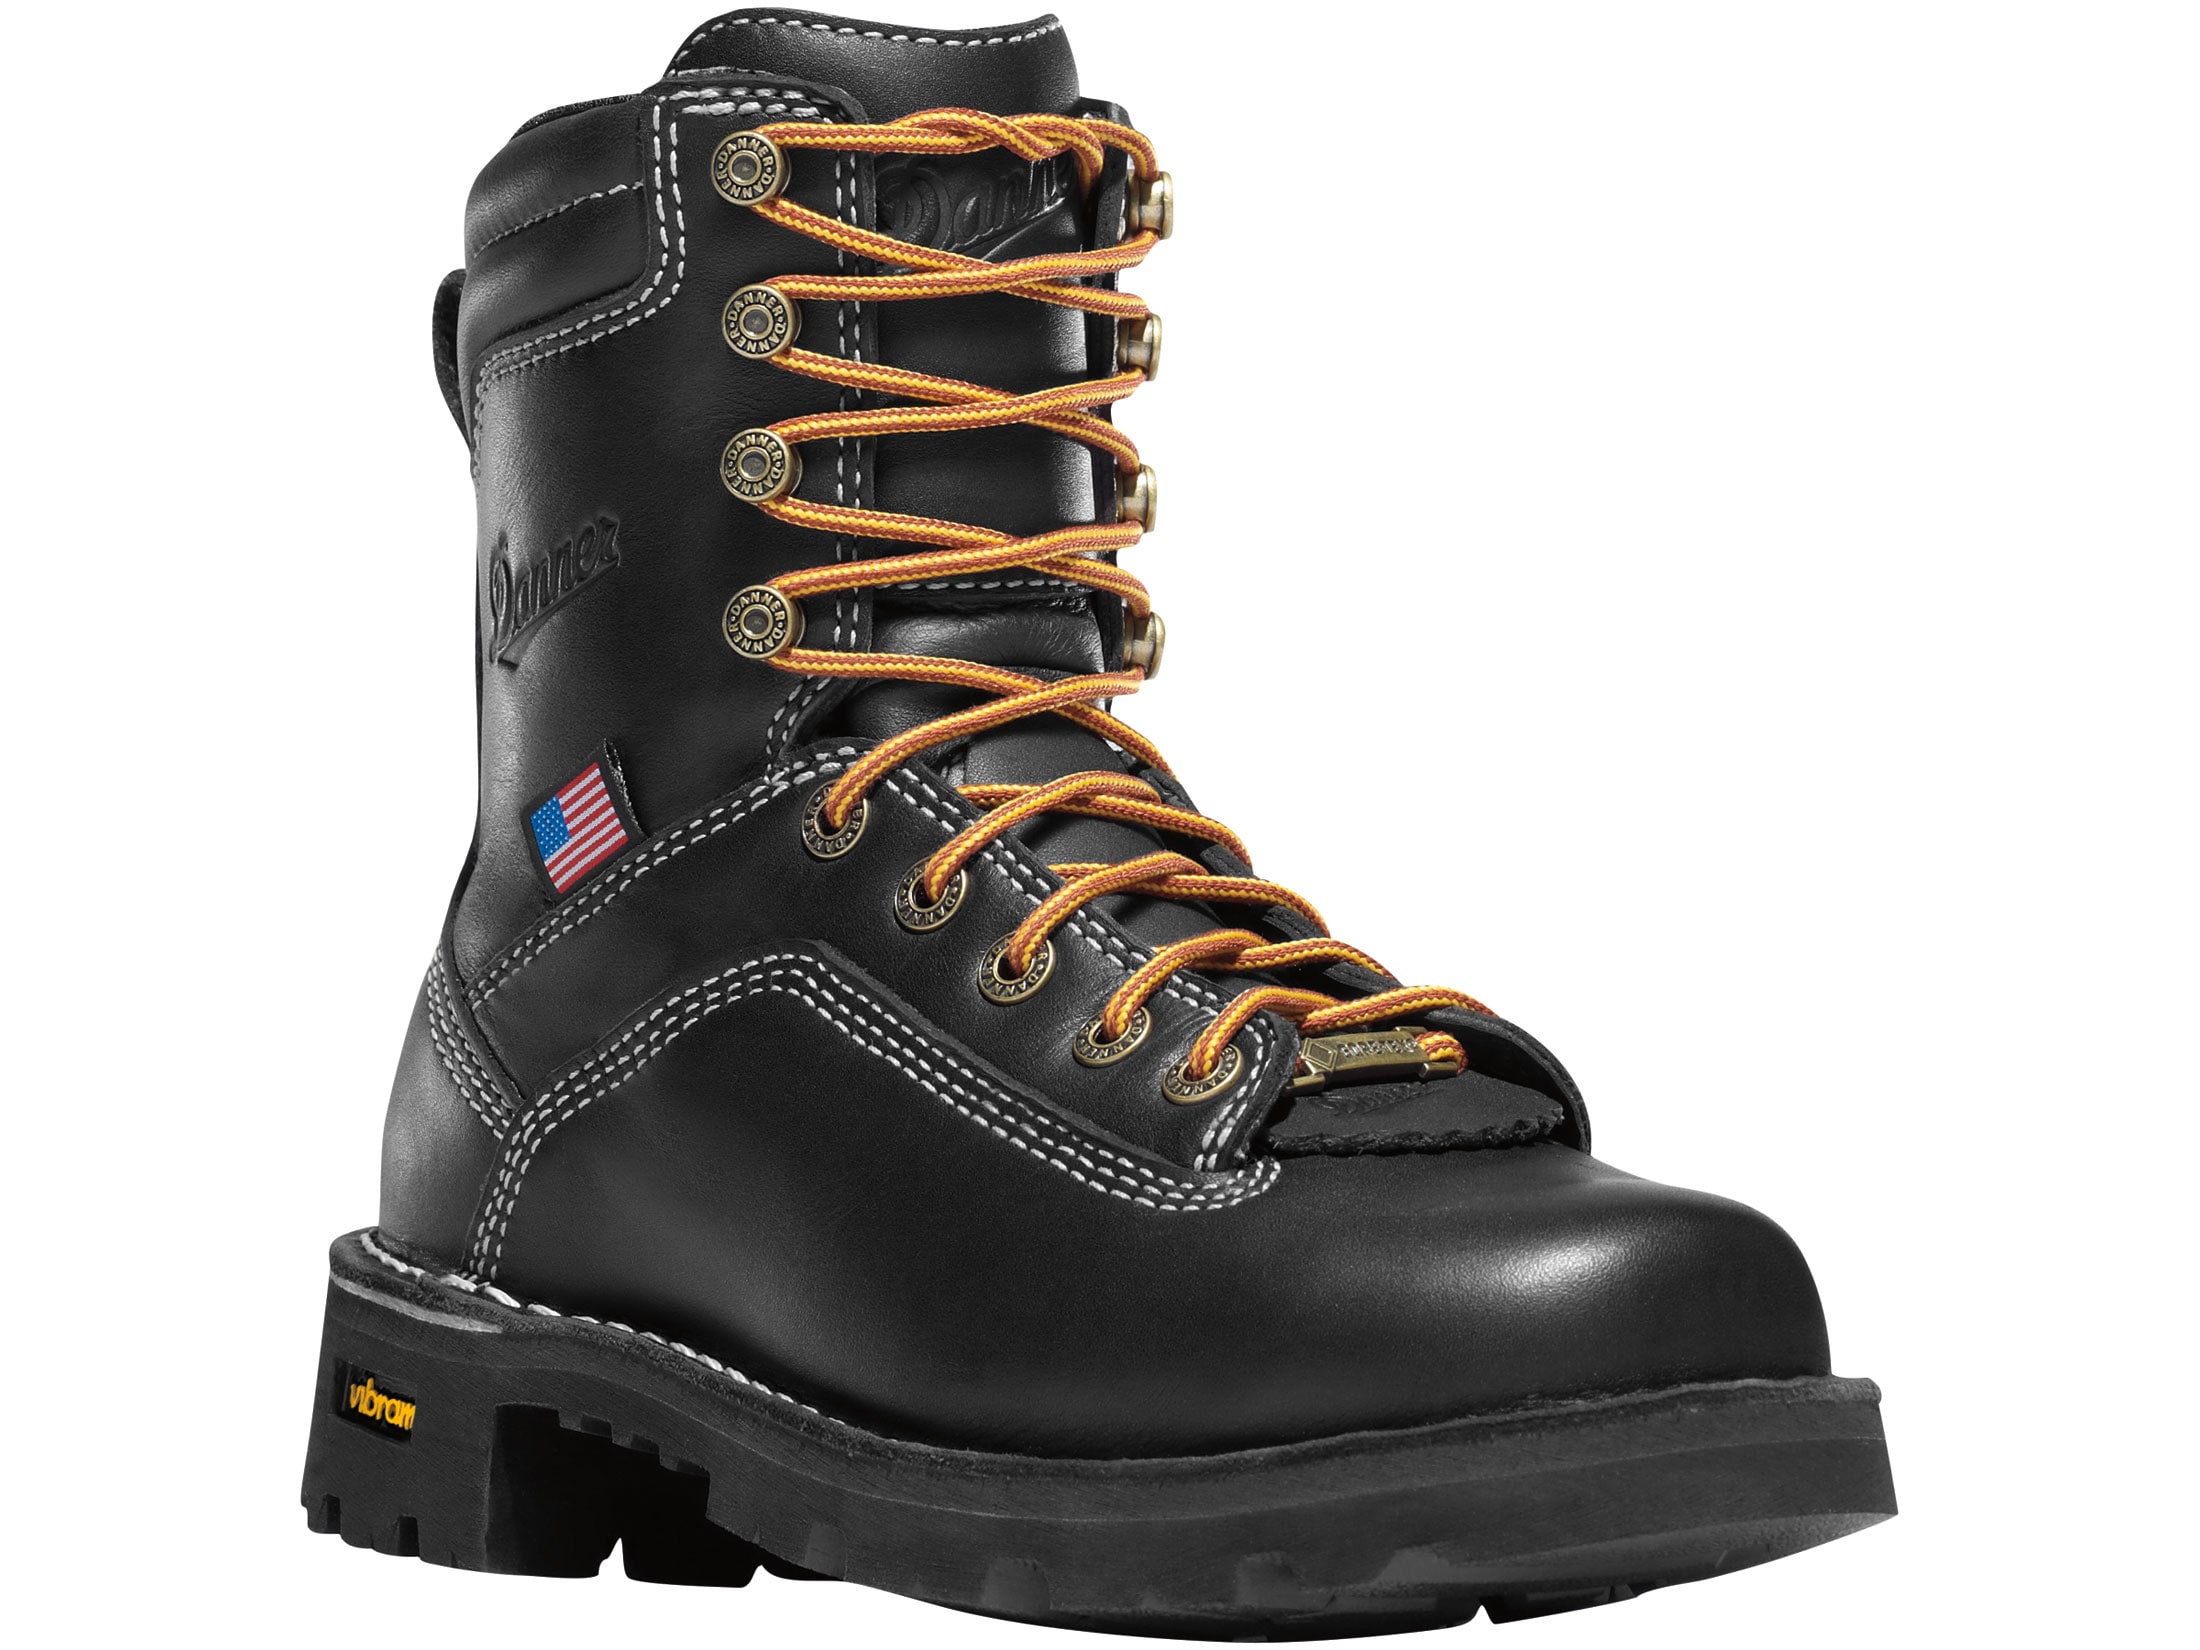 Danner Quarry USA 7 GORE-TEX Alloy Toe Work Boots Leather Black